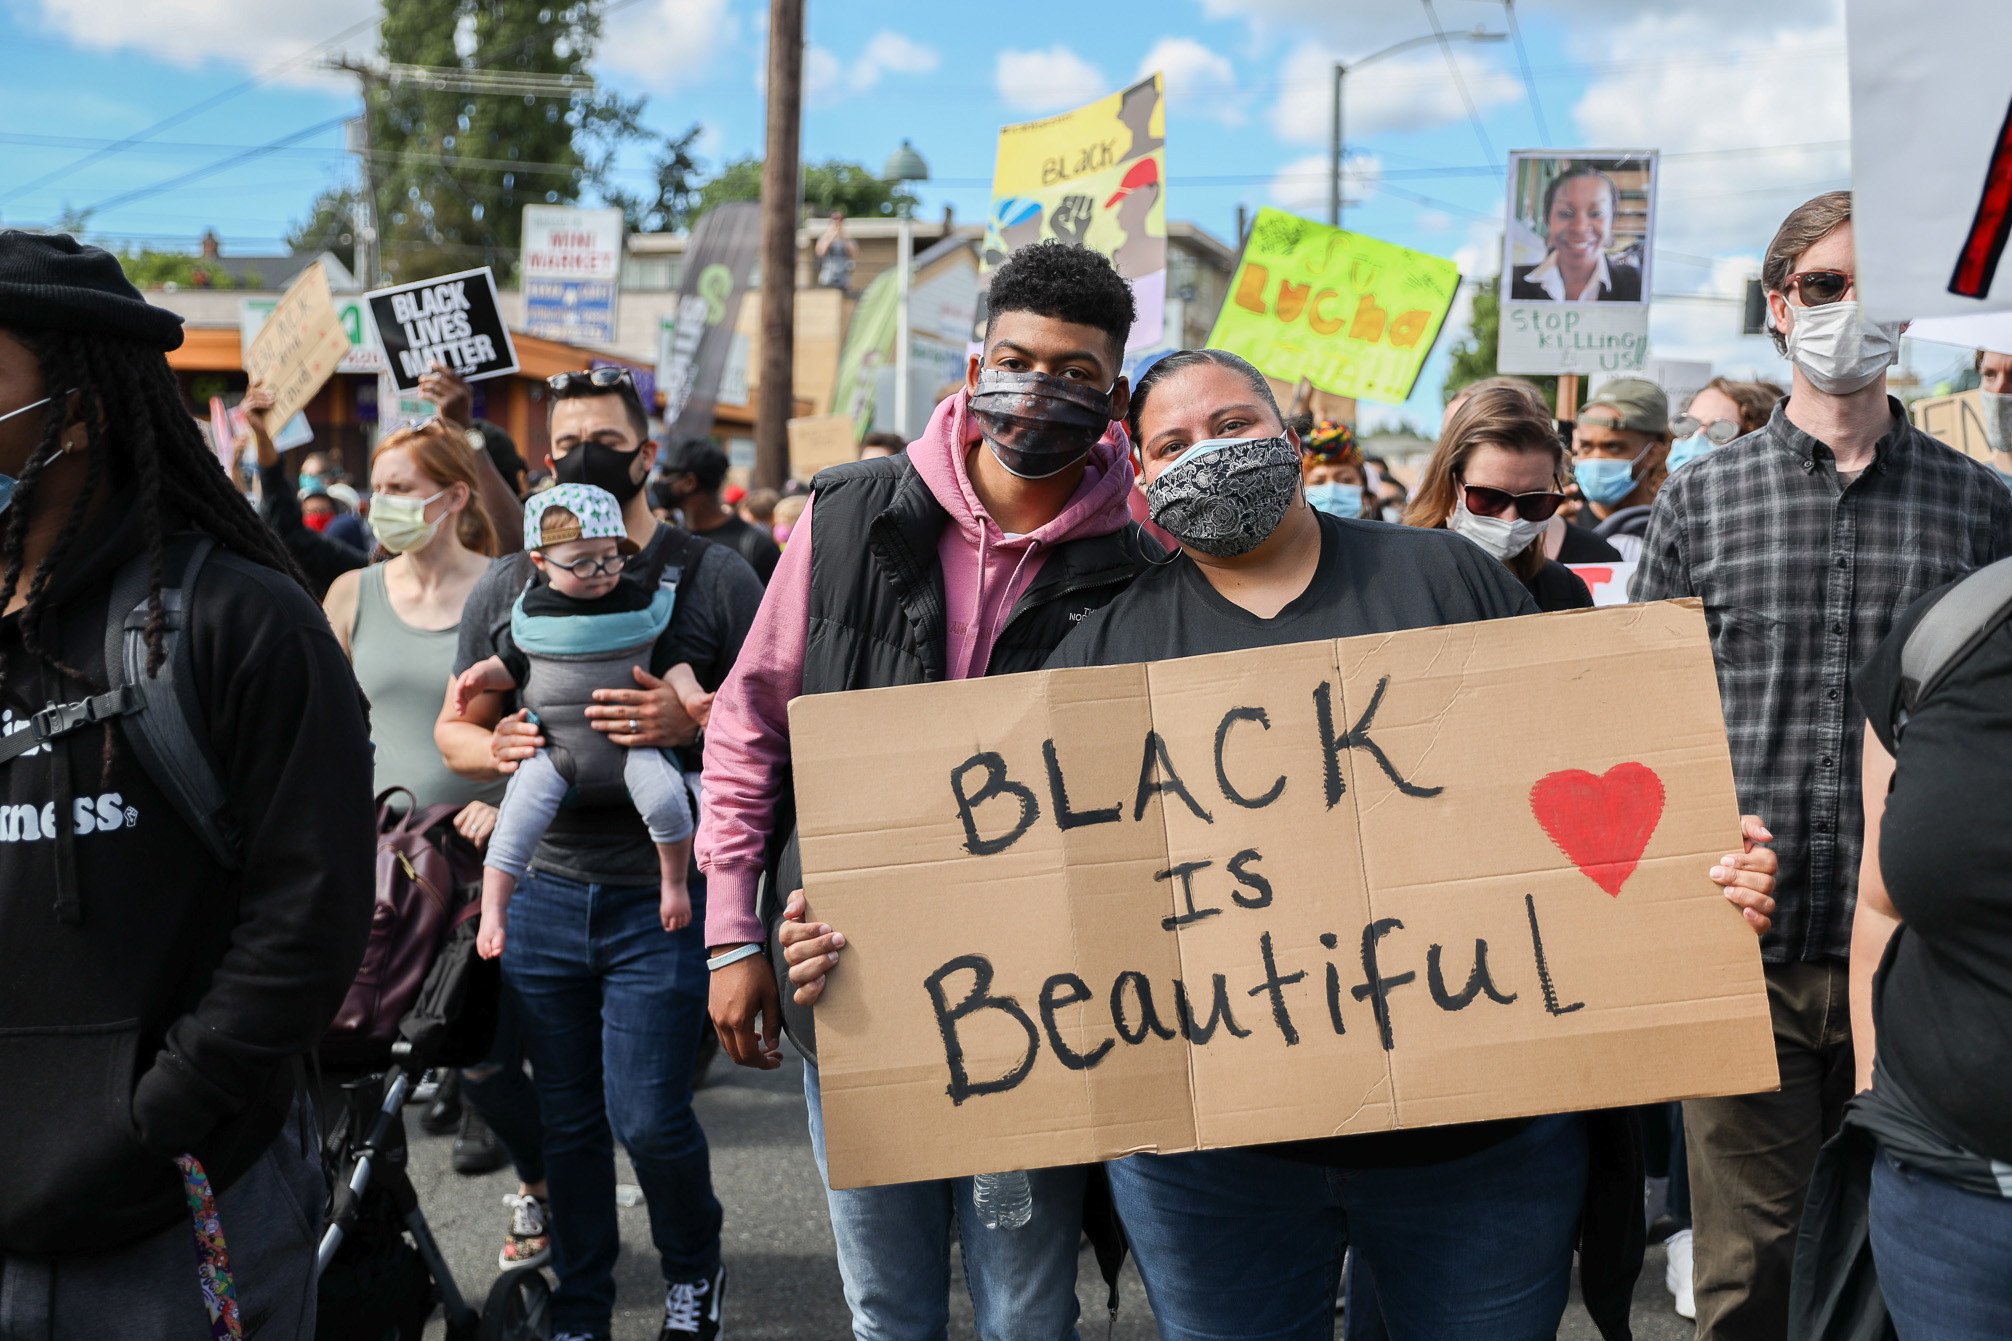 Protesters hold a sign that reads "Black is Beautiful"